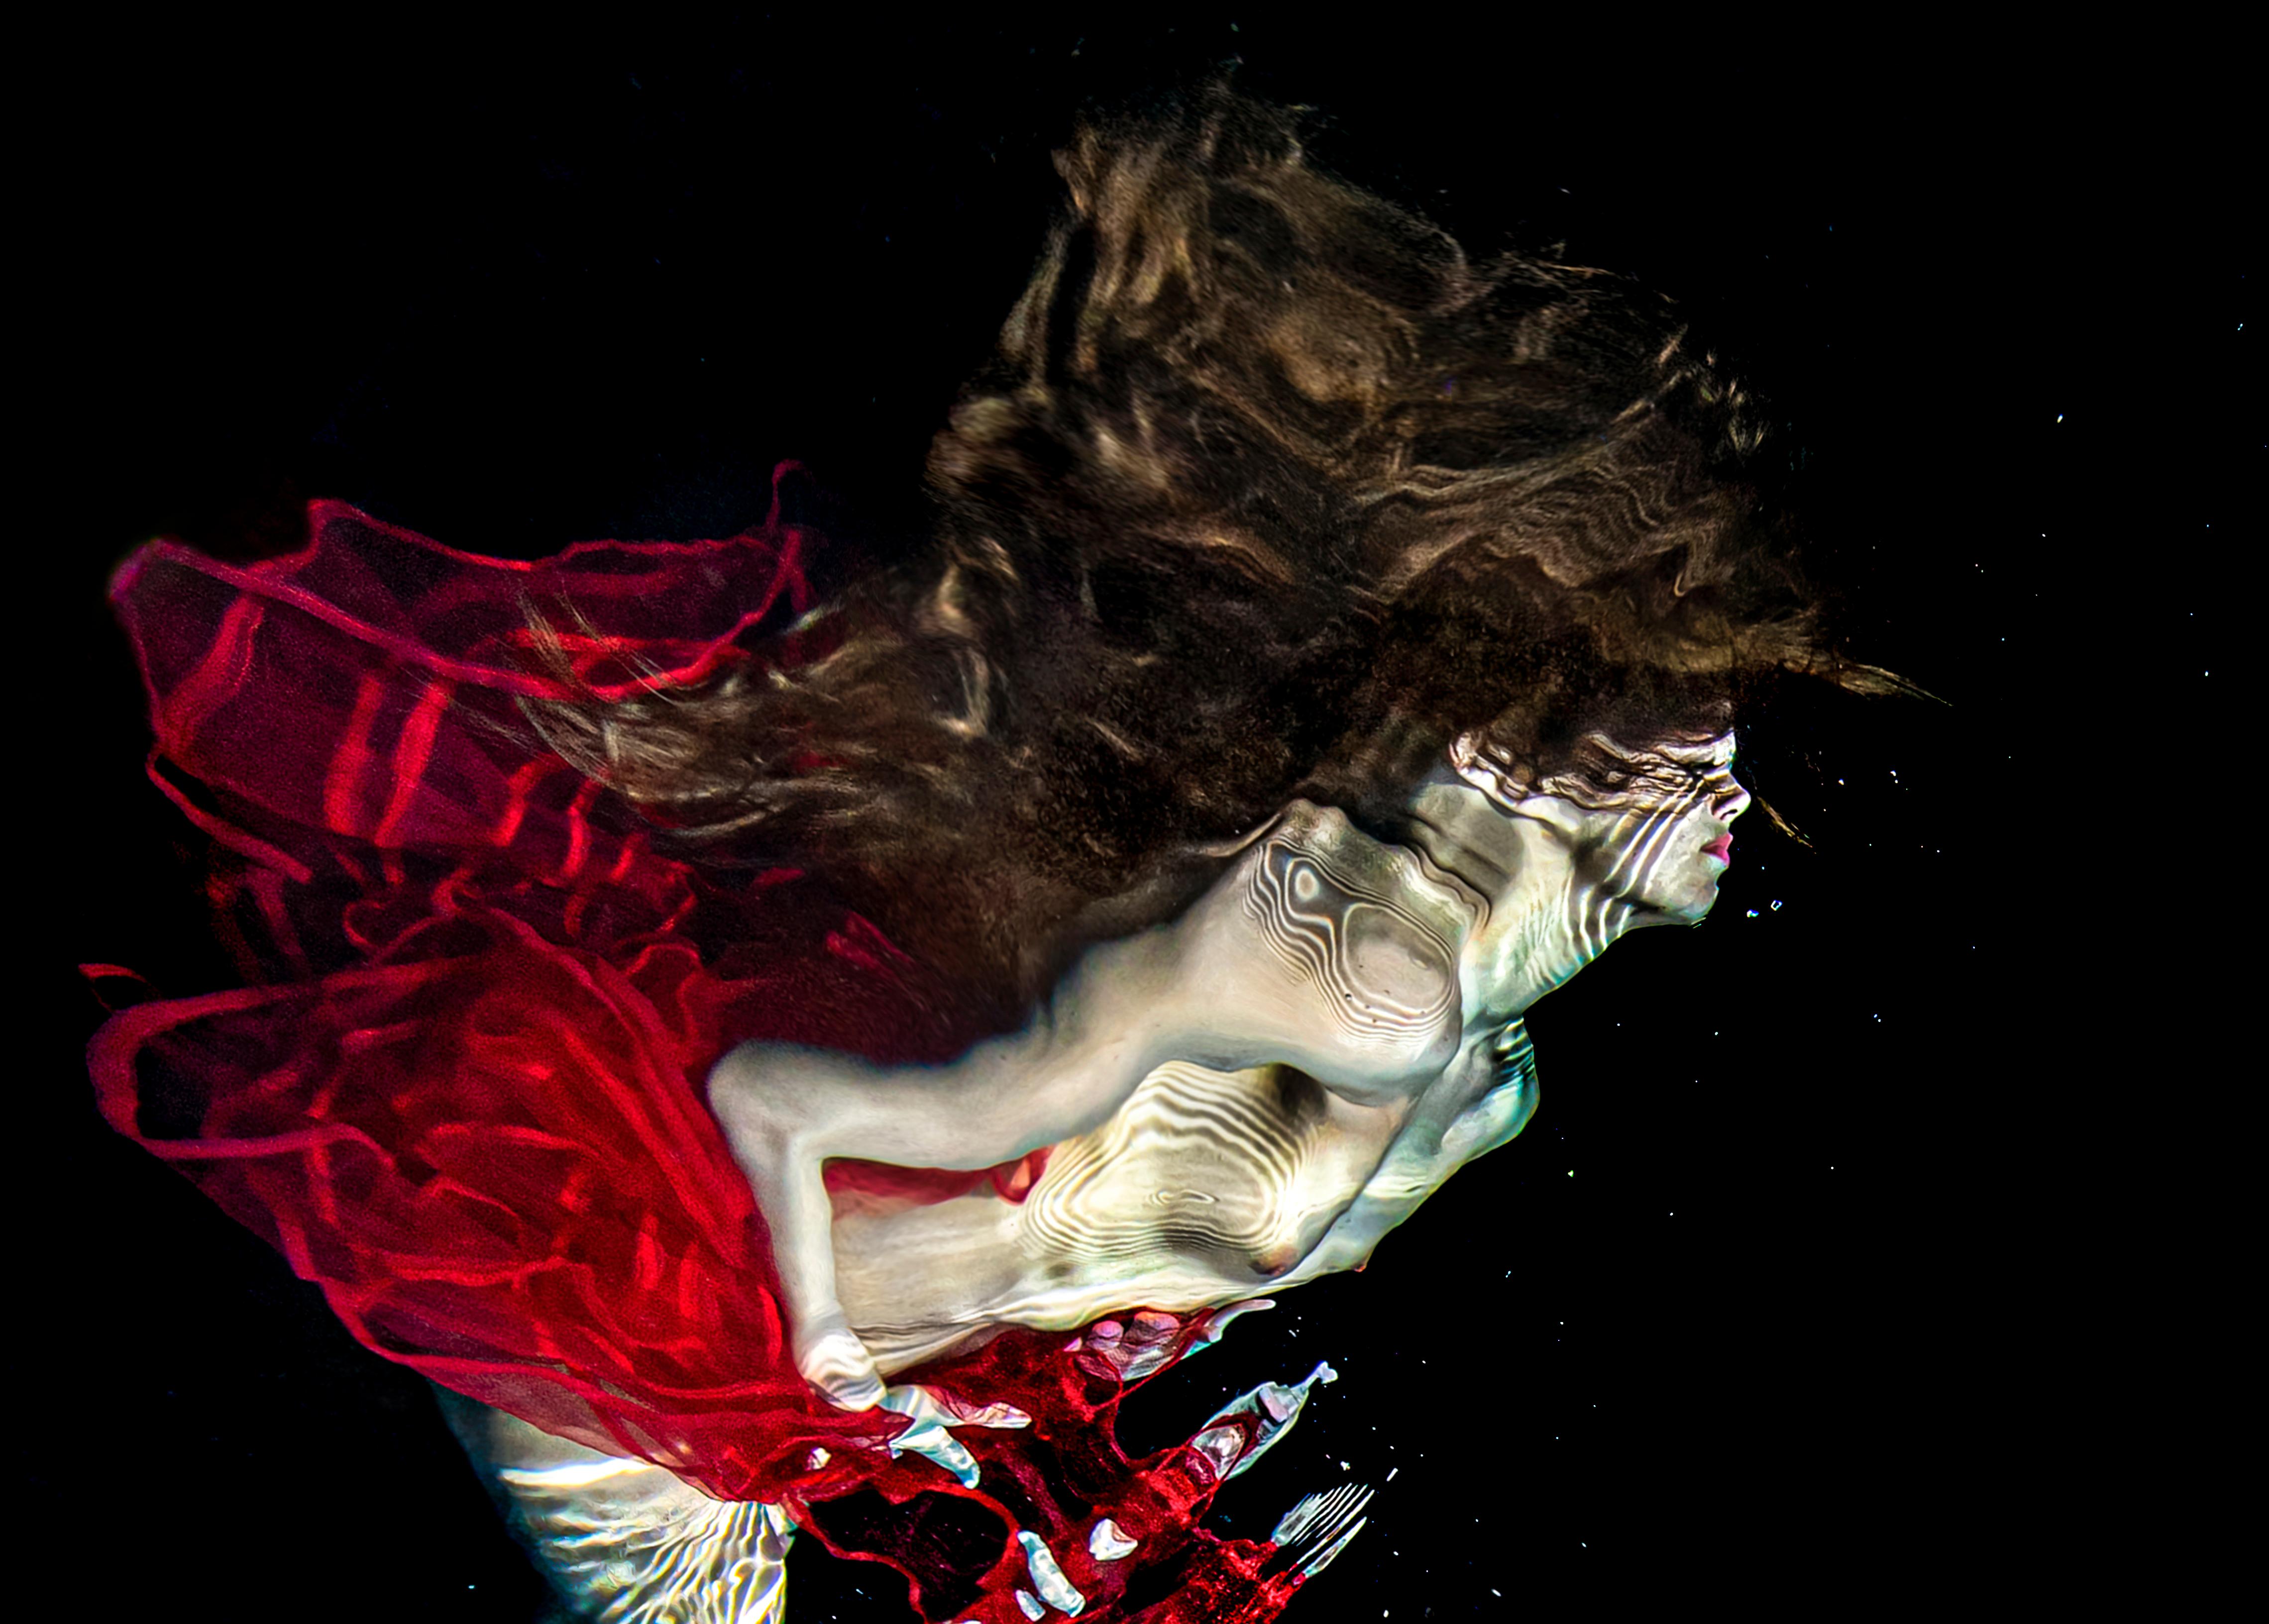 Salsa - underwater nude photograph - series REFLECTIONS - archival pigment 16x24 - Photograph by Alex Sher